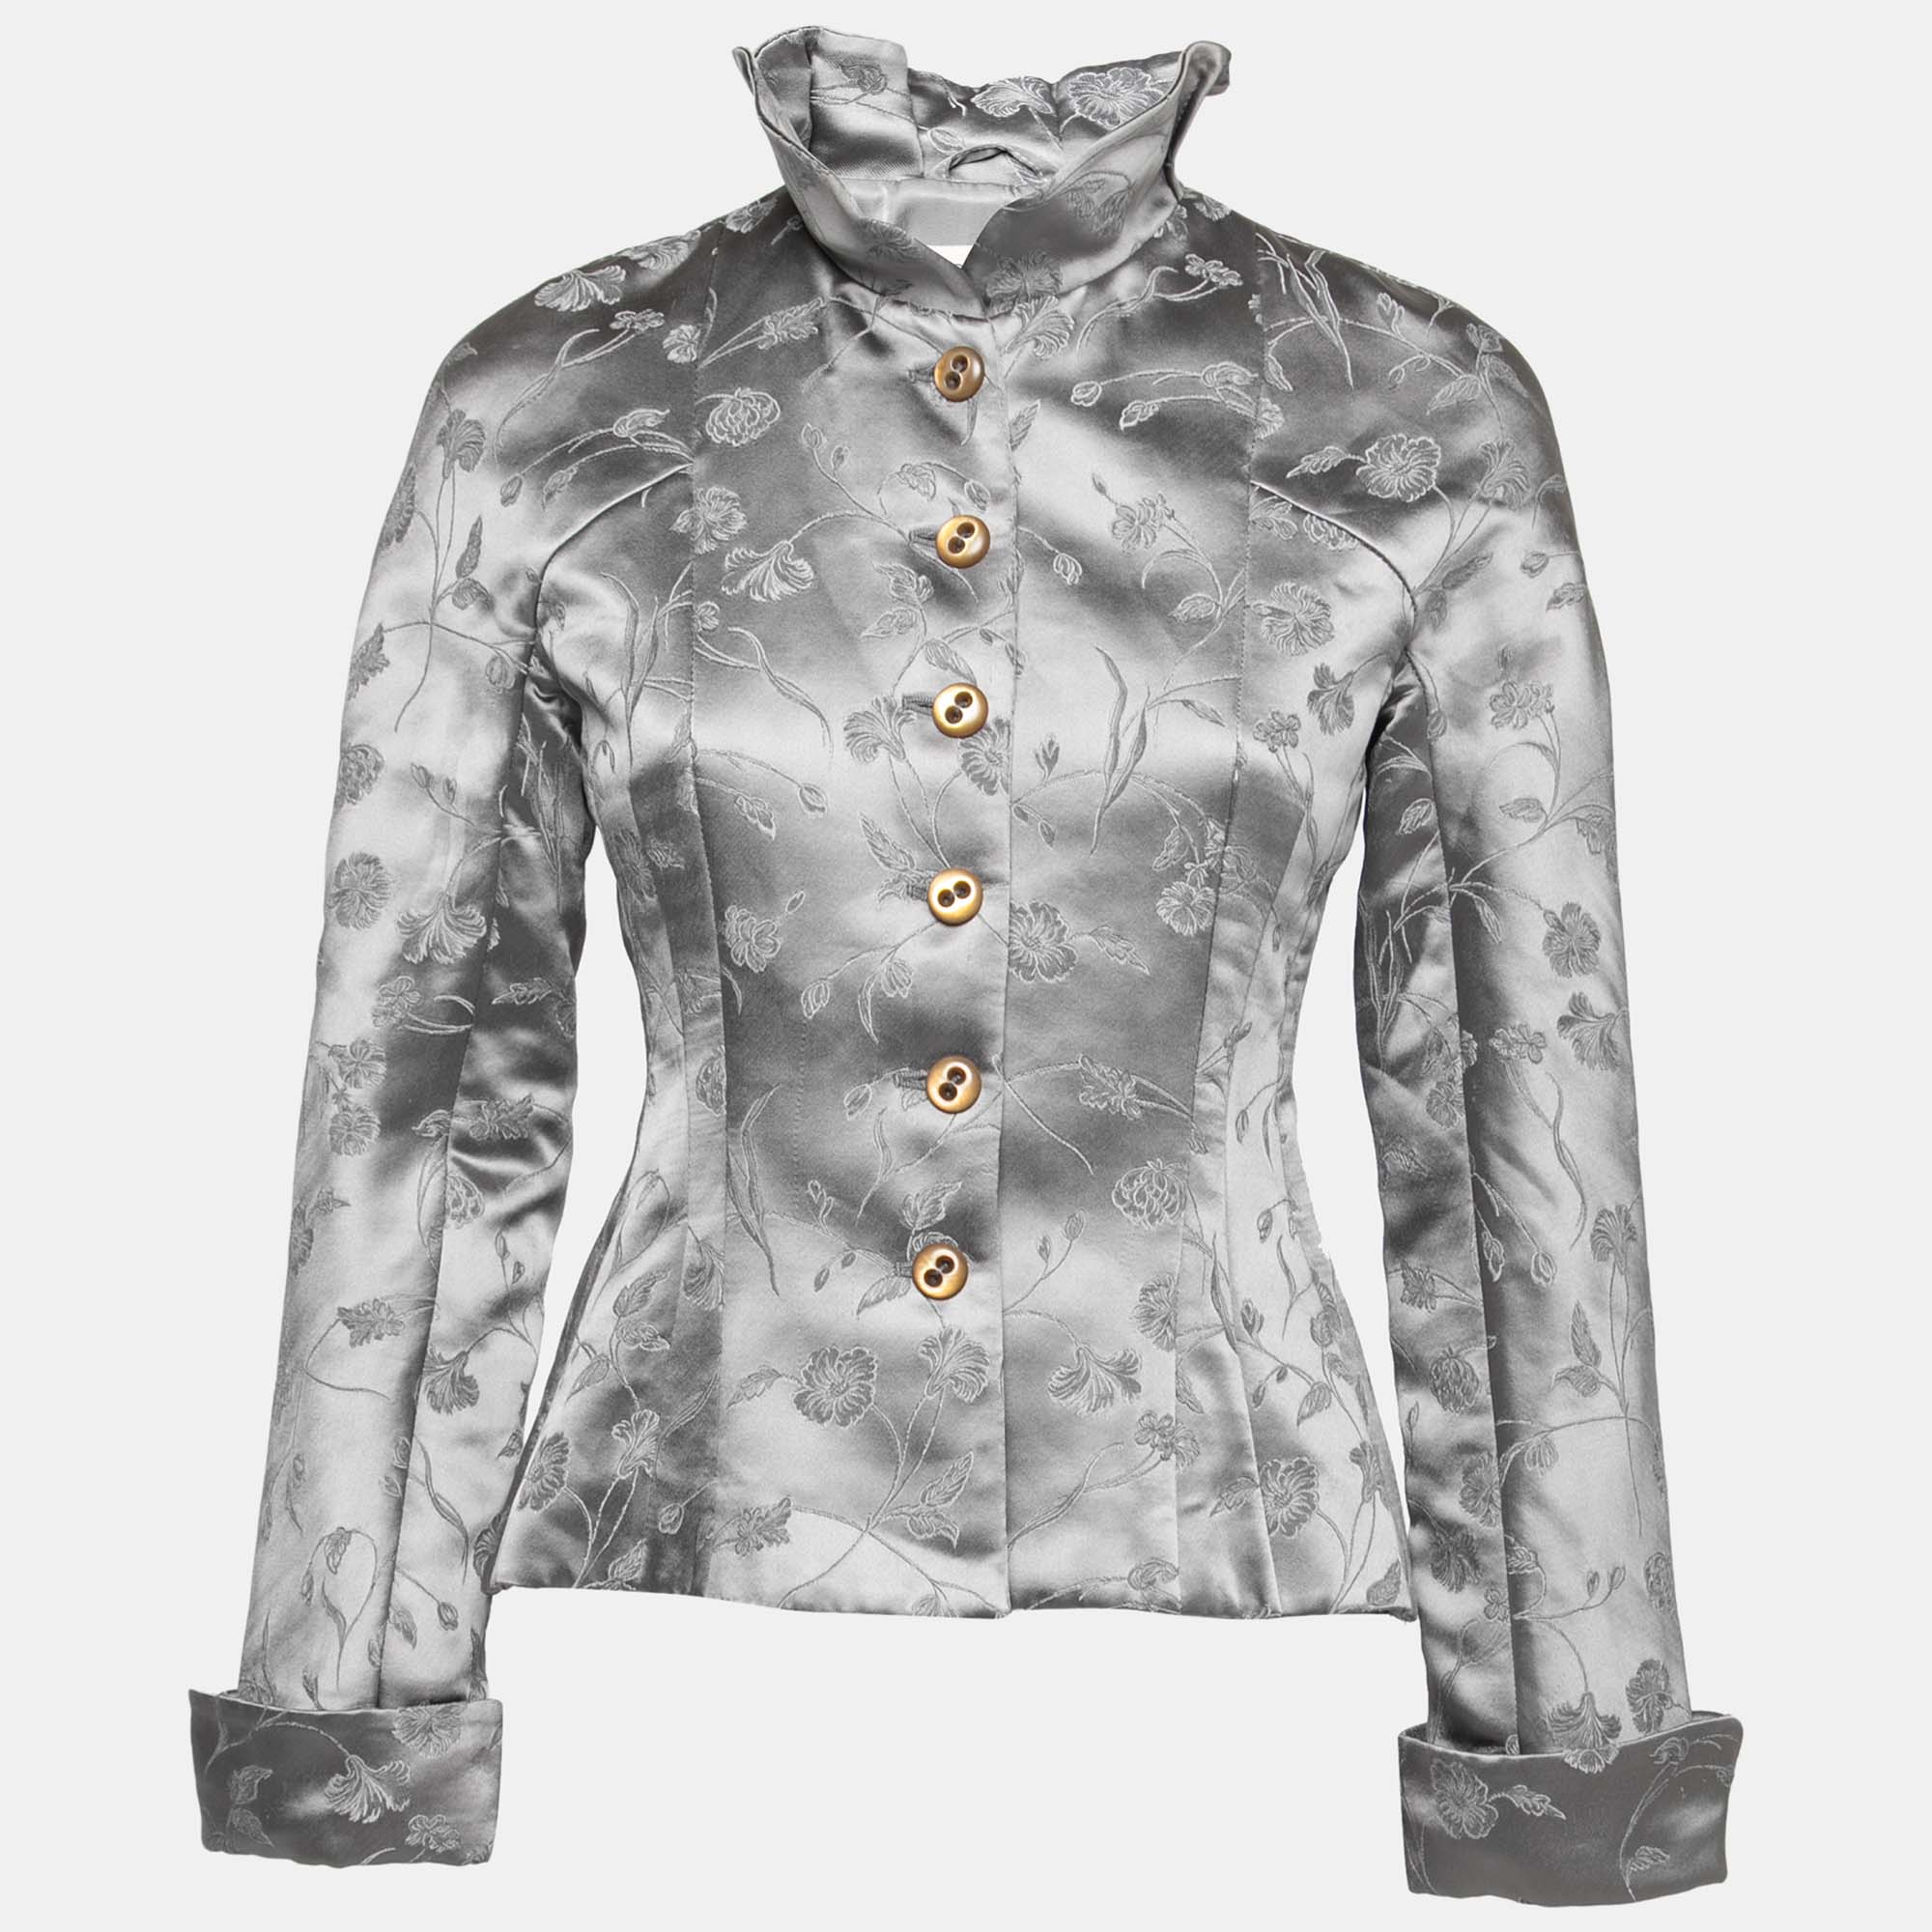 Emporio armani grey floral embroidered button front jacket m